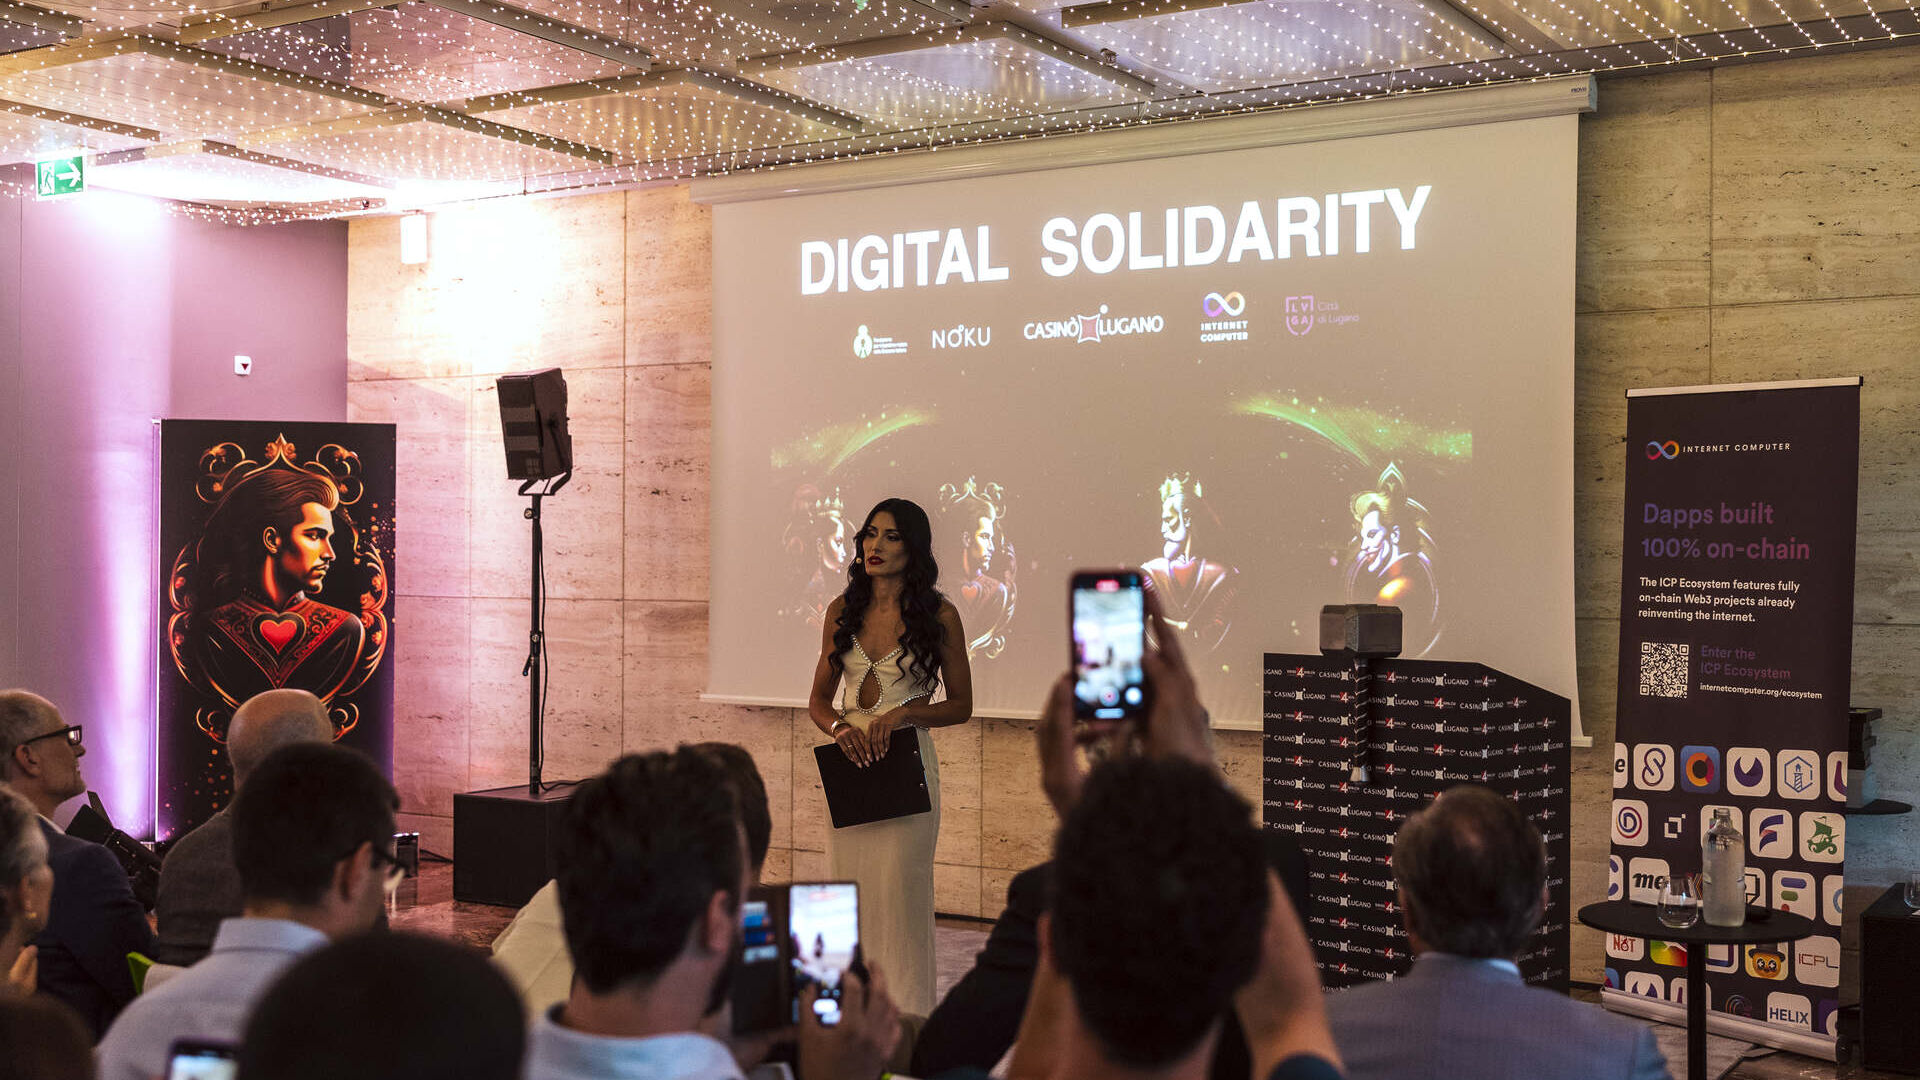 Digital Solidarity: the evening dedicated to the NFT collection of the Lugano Casino in Switzerland